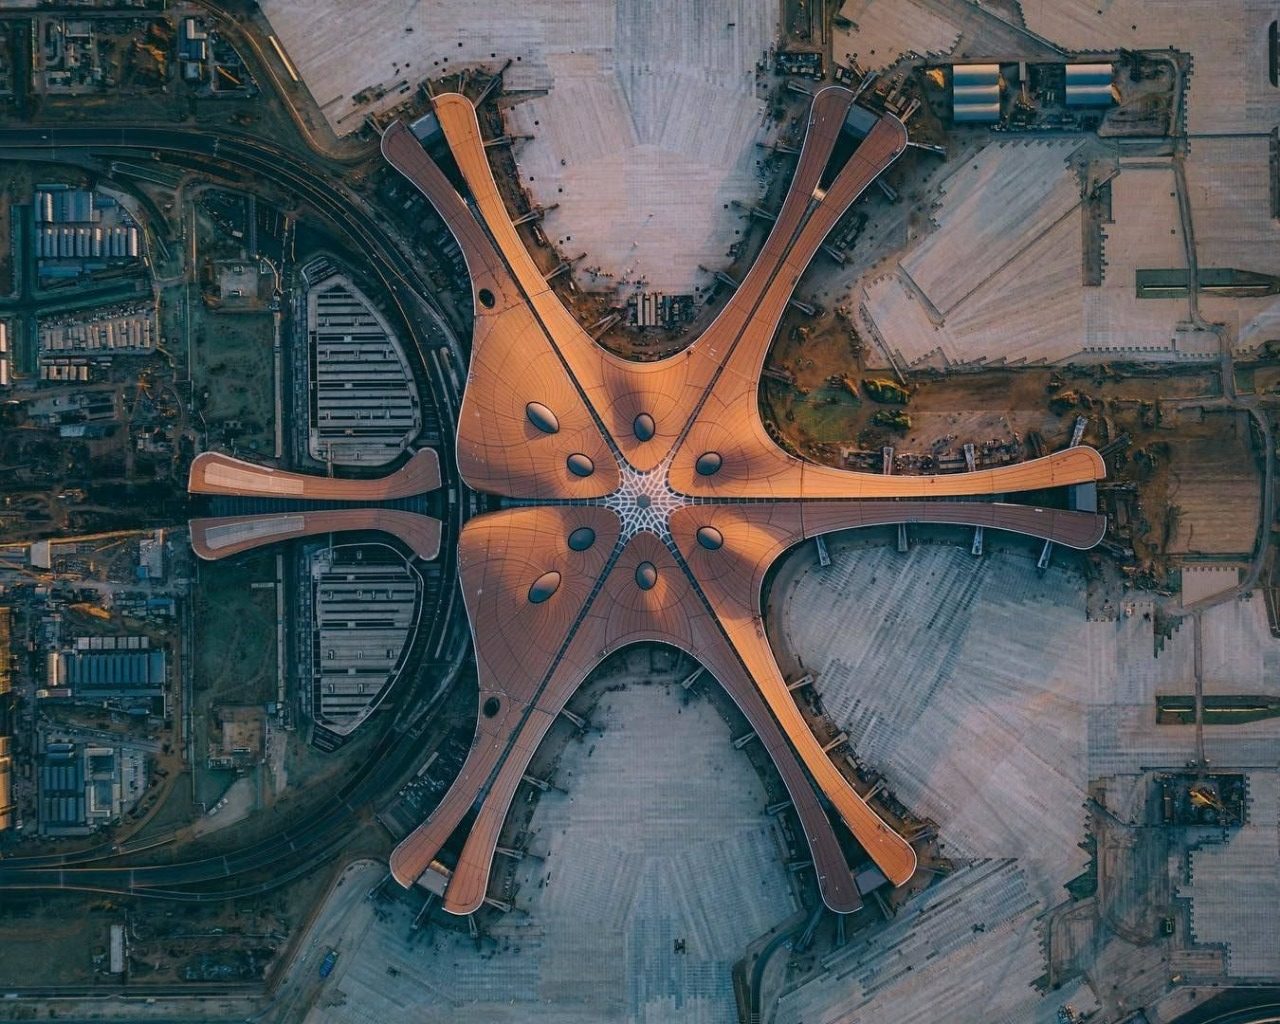 Beijing’s New Starfish Airport Is Officially The World’s Largest Airport